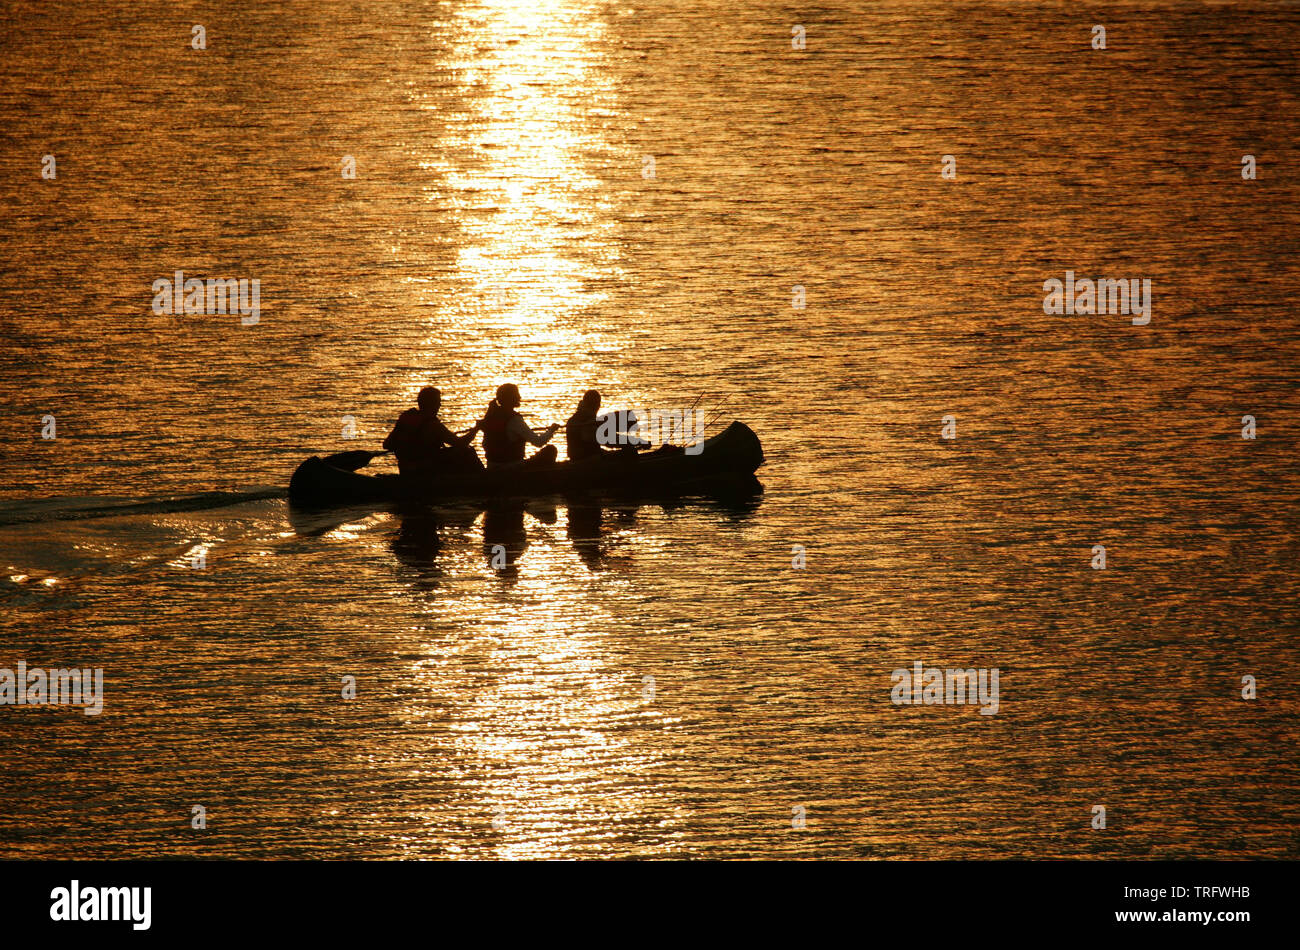 Three persons paddling in a canoe at sunset in the lake Vansjø in Østfold, Norway. Vansjø is the largest lake in Østfold, and its surrounding lakes and rivers are a part of the water system called Morsavassdraget. August, 2006. Stock Photo